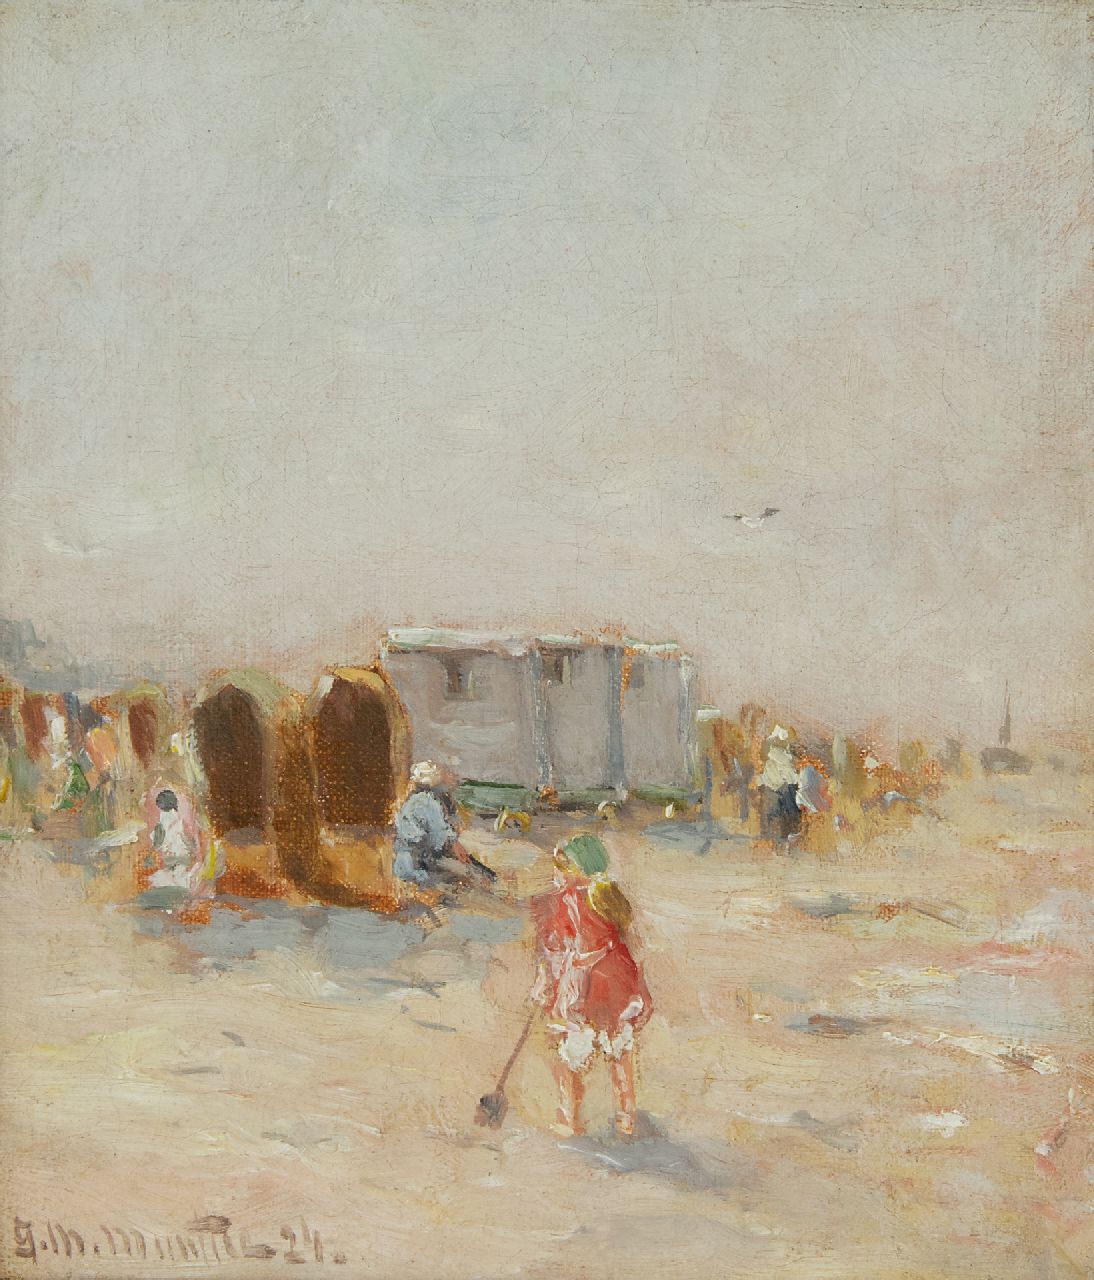 Munthe G.A.L.  | Gerhard Arij Ludwig 'Morgenstjerne' Munthe, Bathers and fisher folk on the beach, oil on canvas 22.6 x 19.5 cm, signed l.l. and dated '24